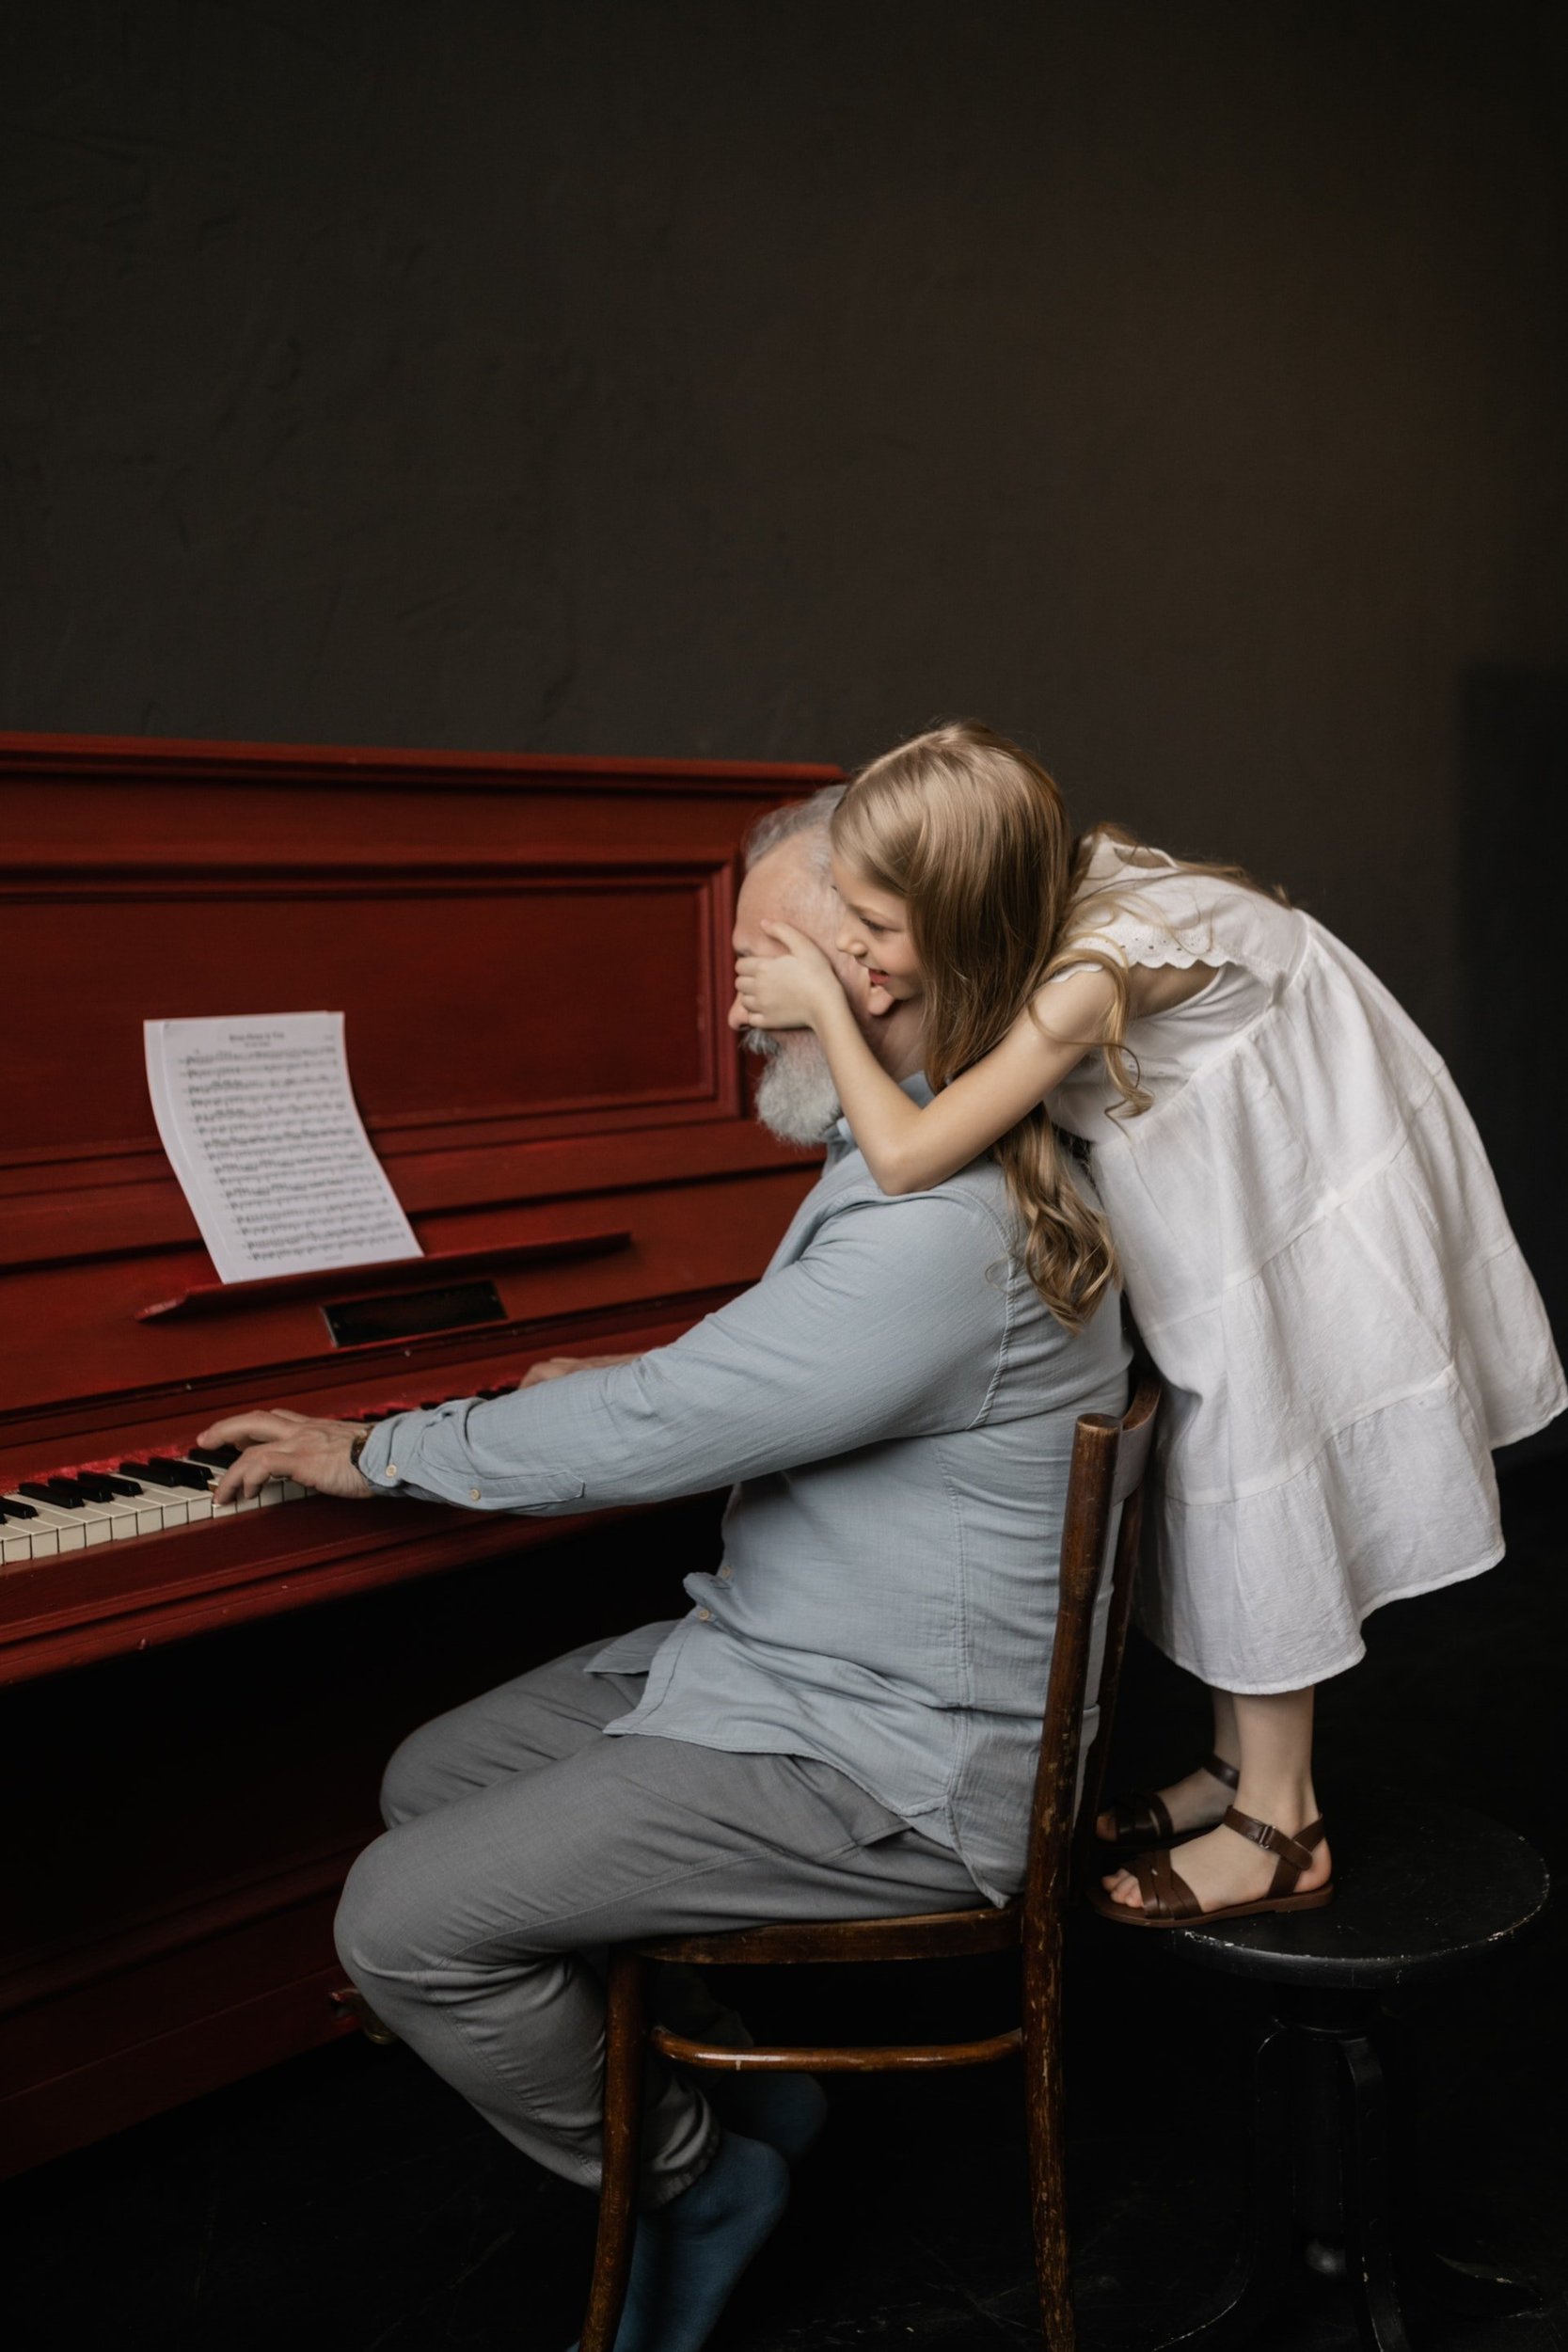 Old man with white beard plays piano with young girl in white dress behind him standing on a stool covering his eyes with her hands.